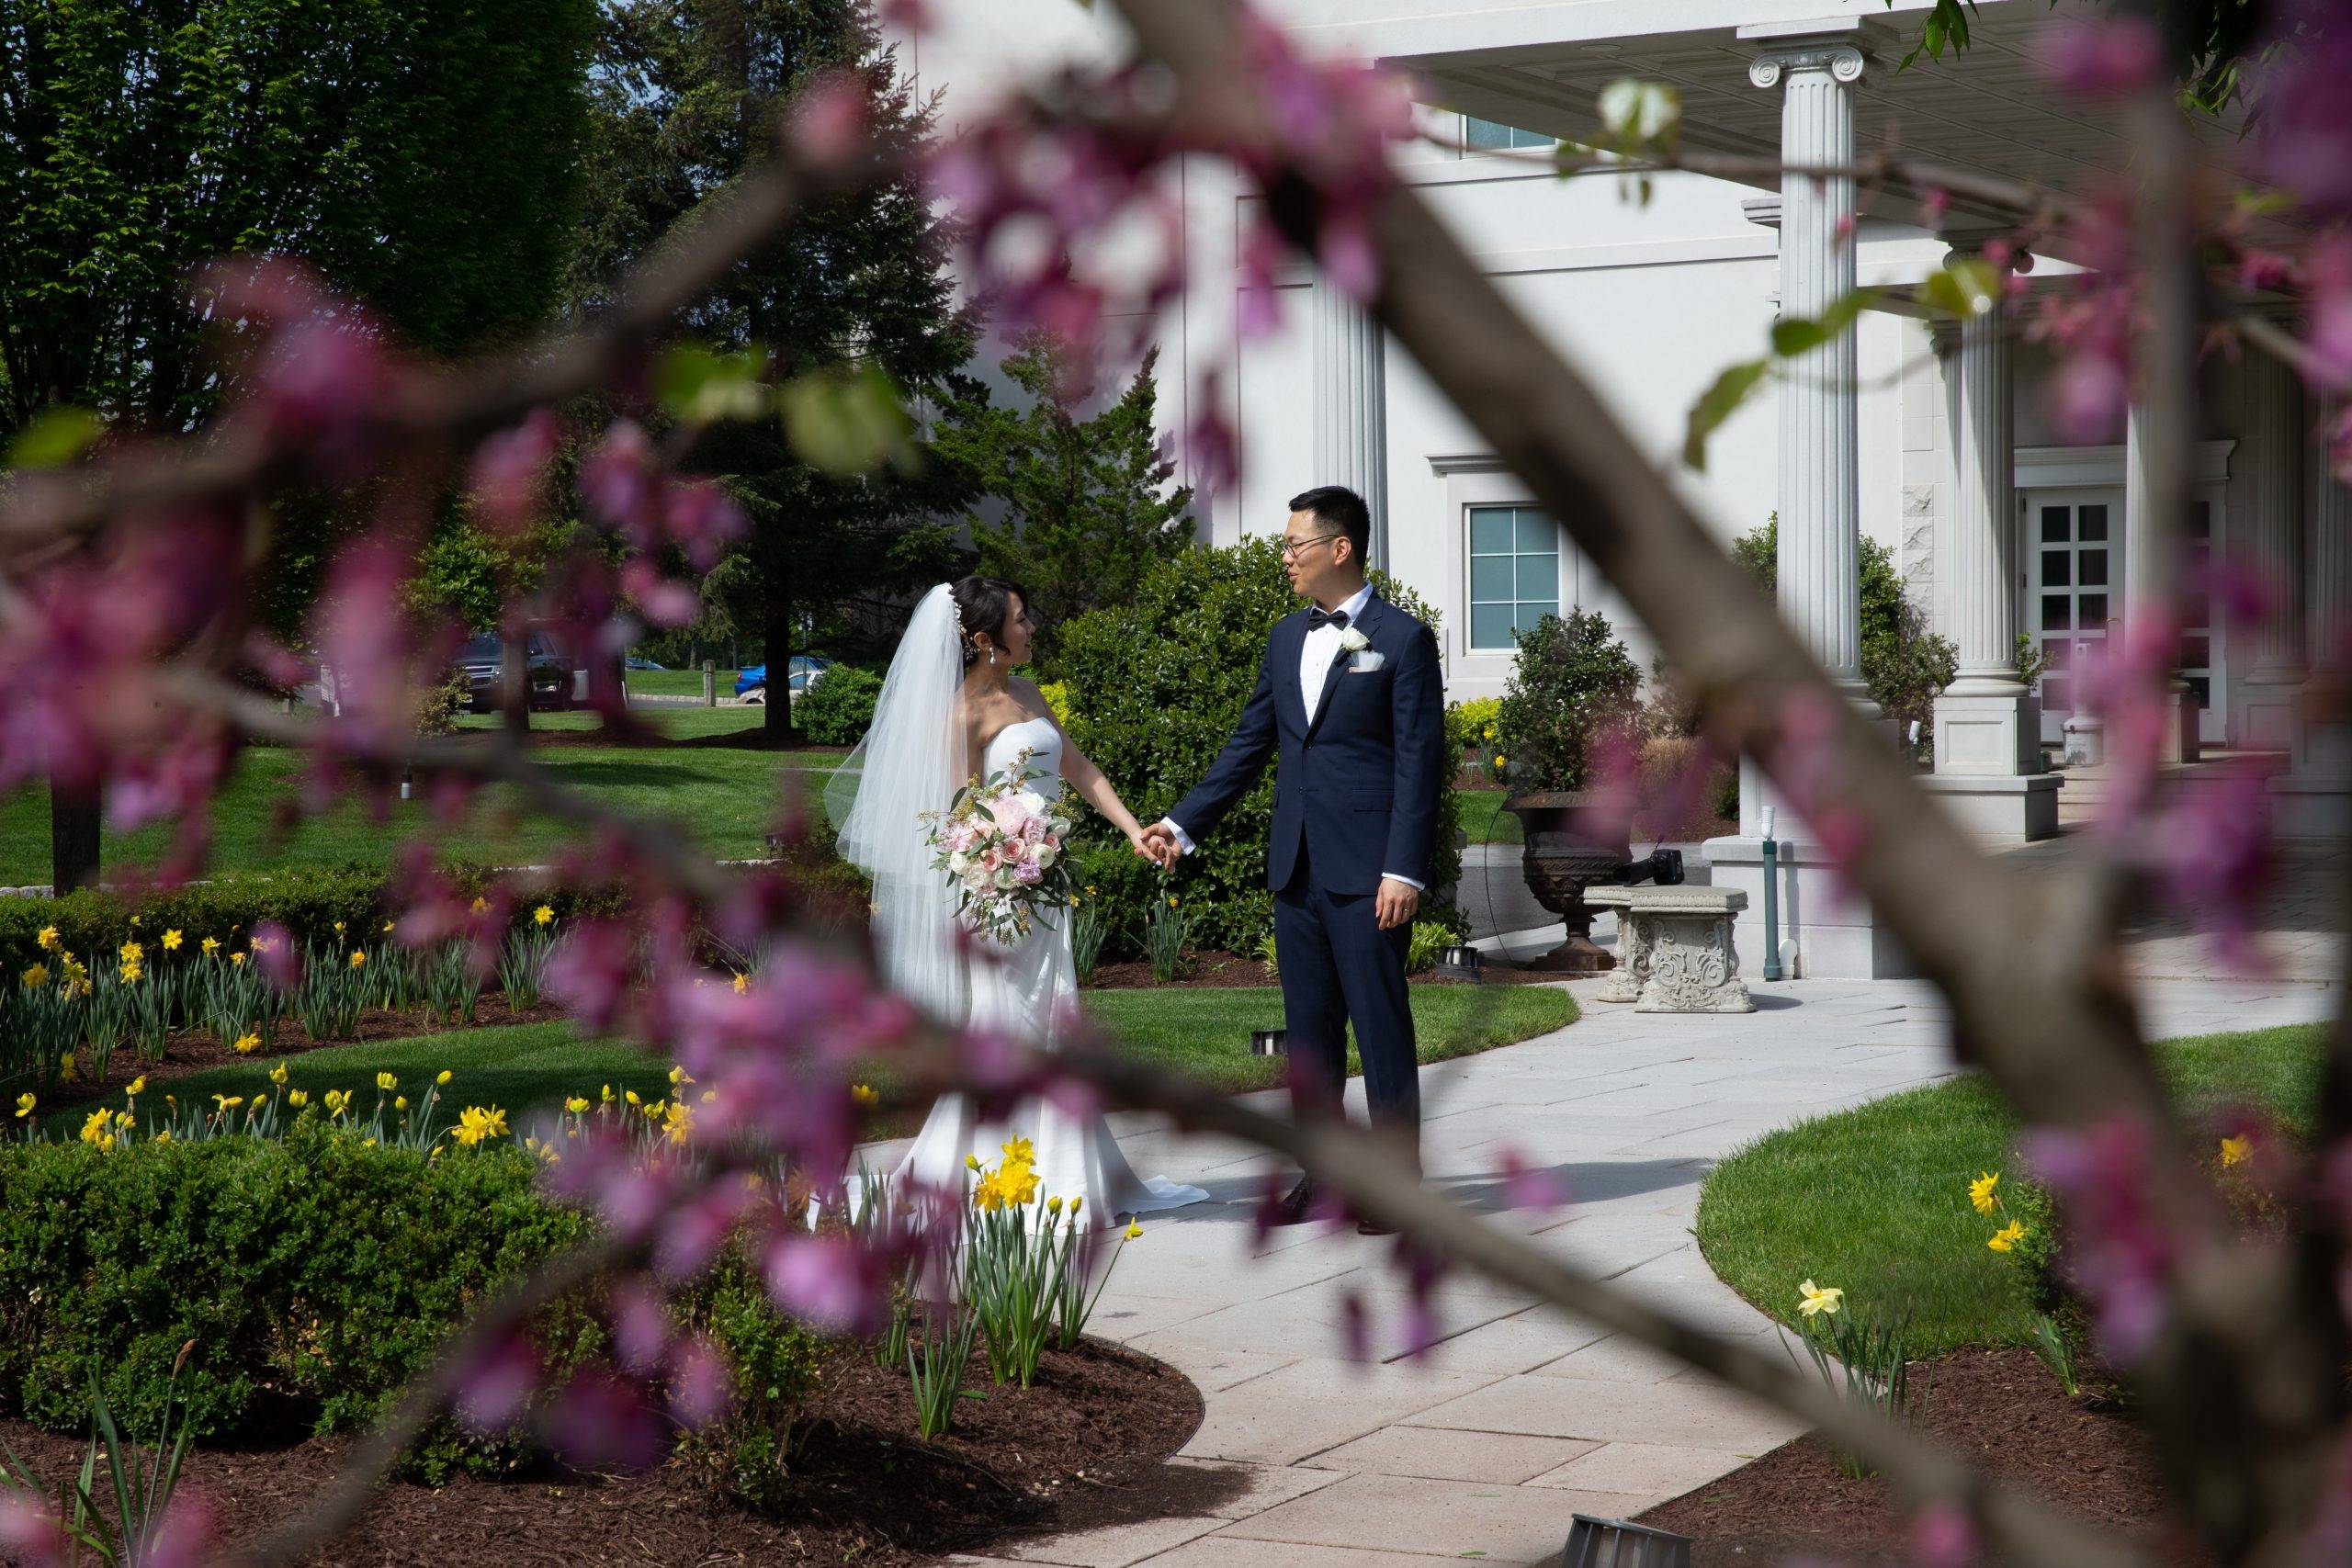 A bride and groom walking down a path in front of a house.